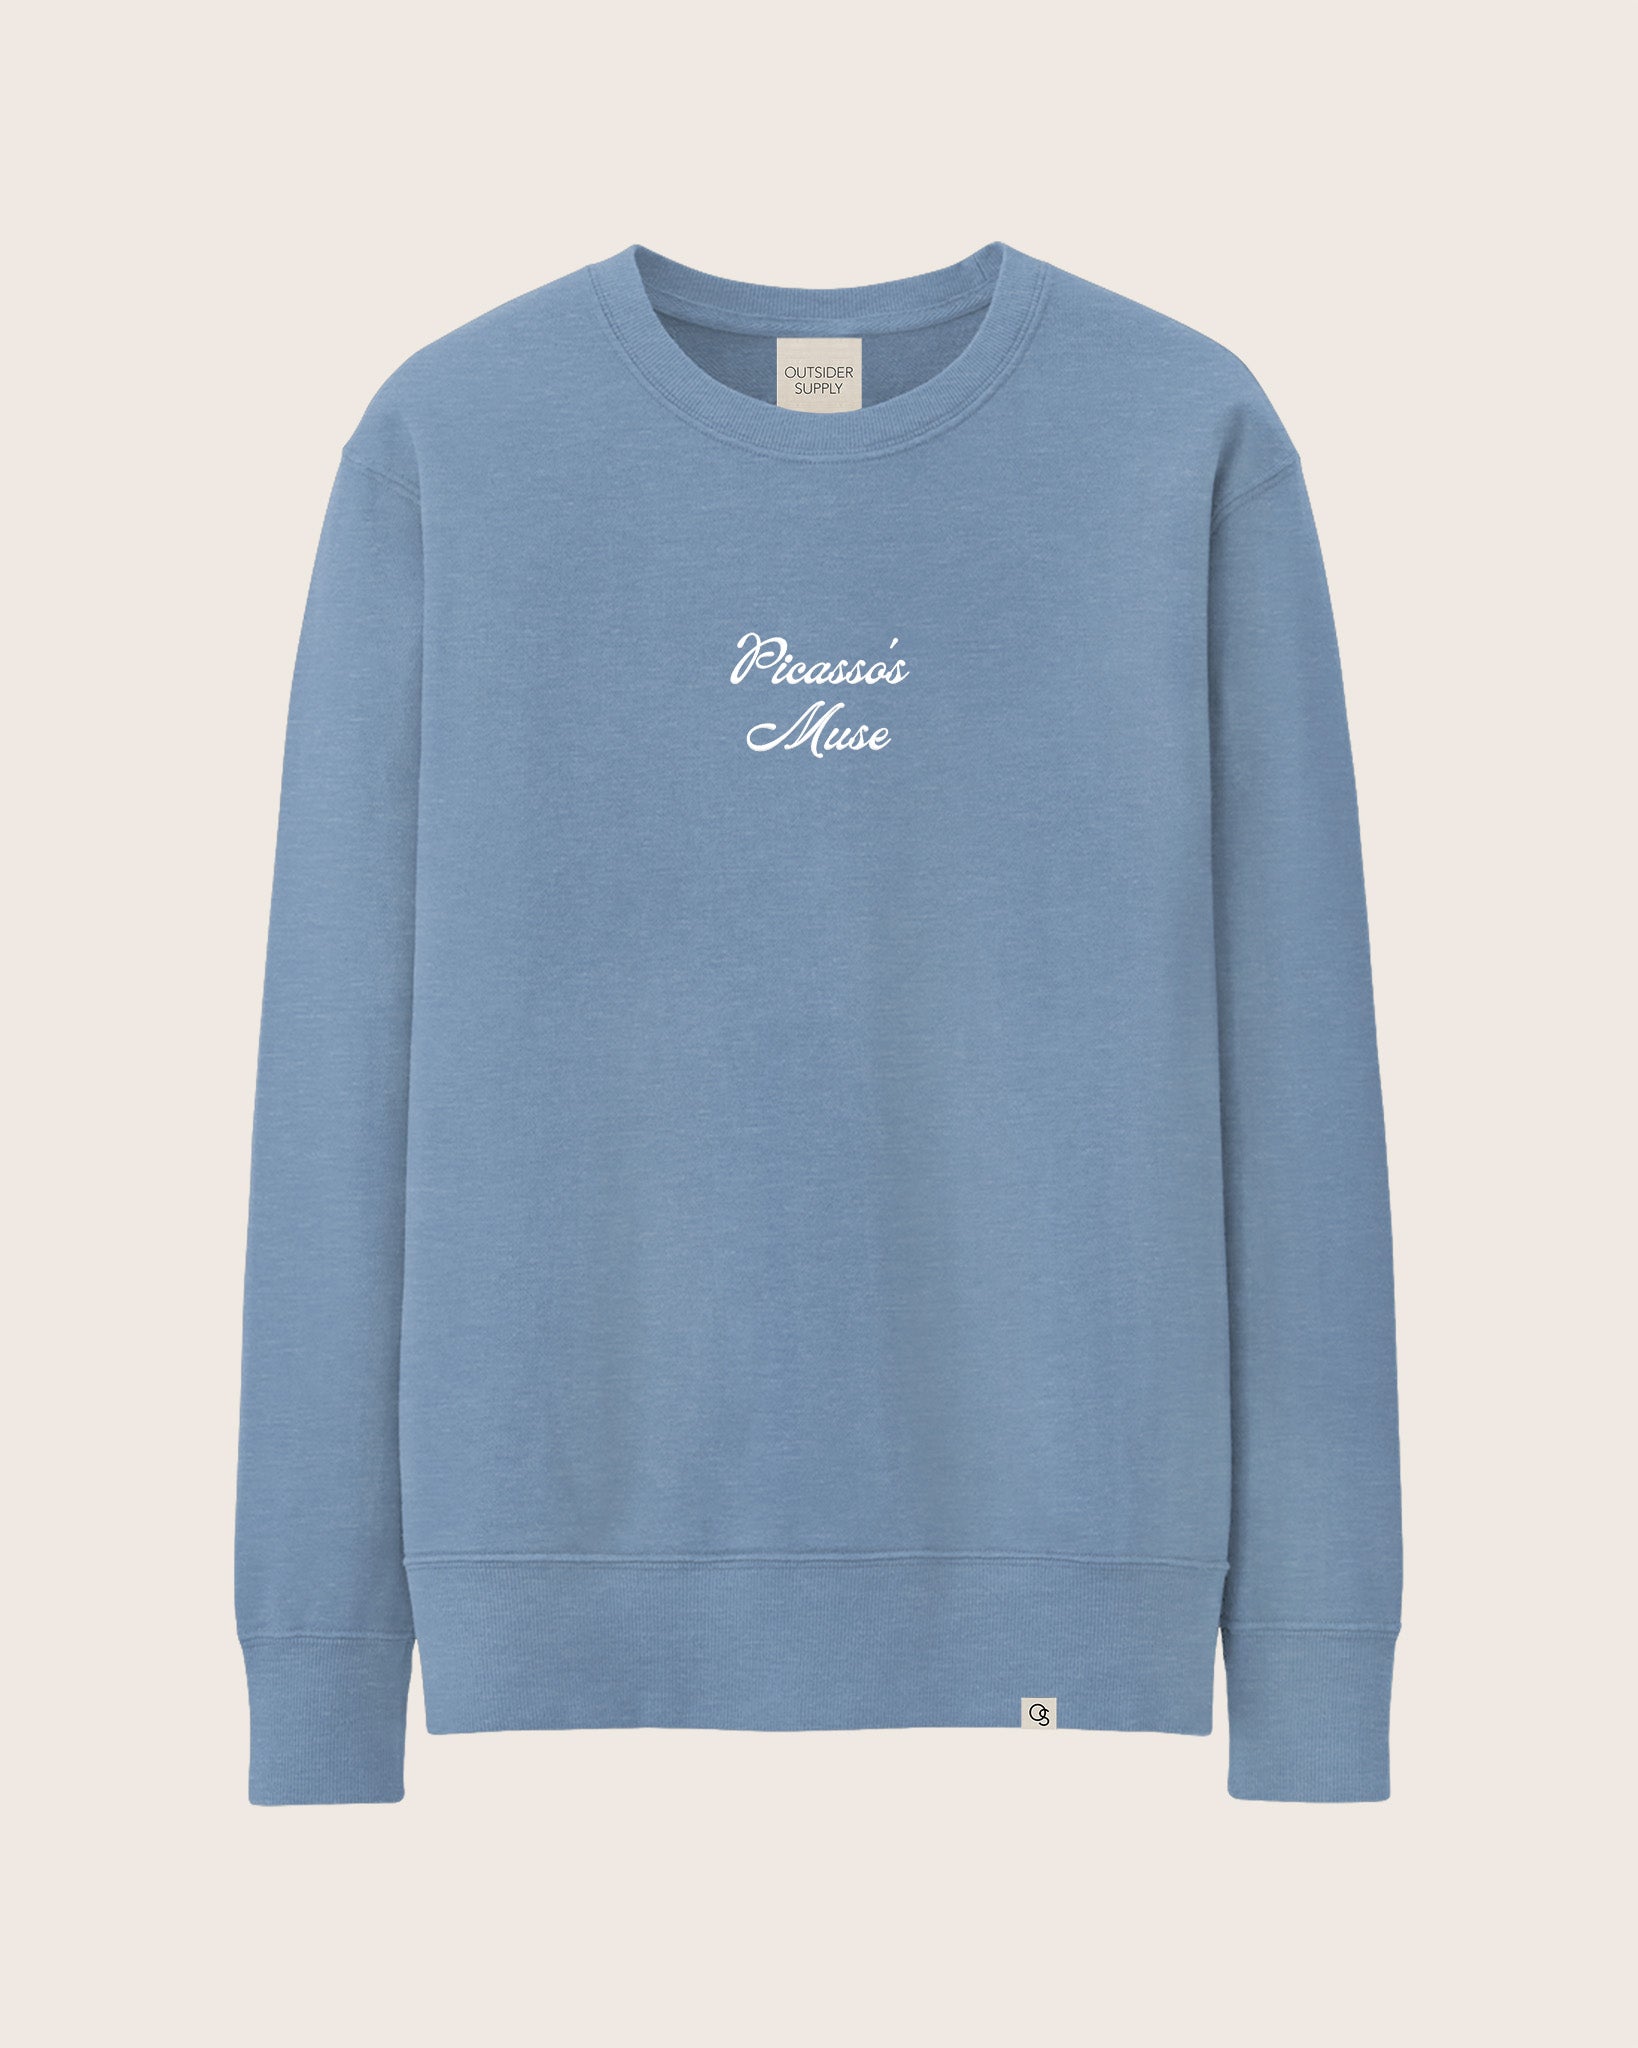 Pastel / Blue Heavyweight Sweatshirt / Crewneck with embroidered script of Picasso’s Muse. 